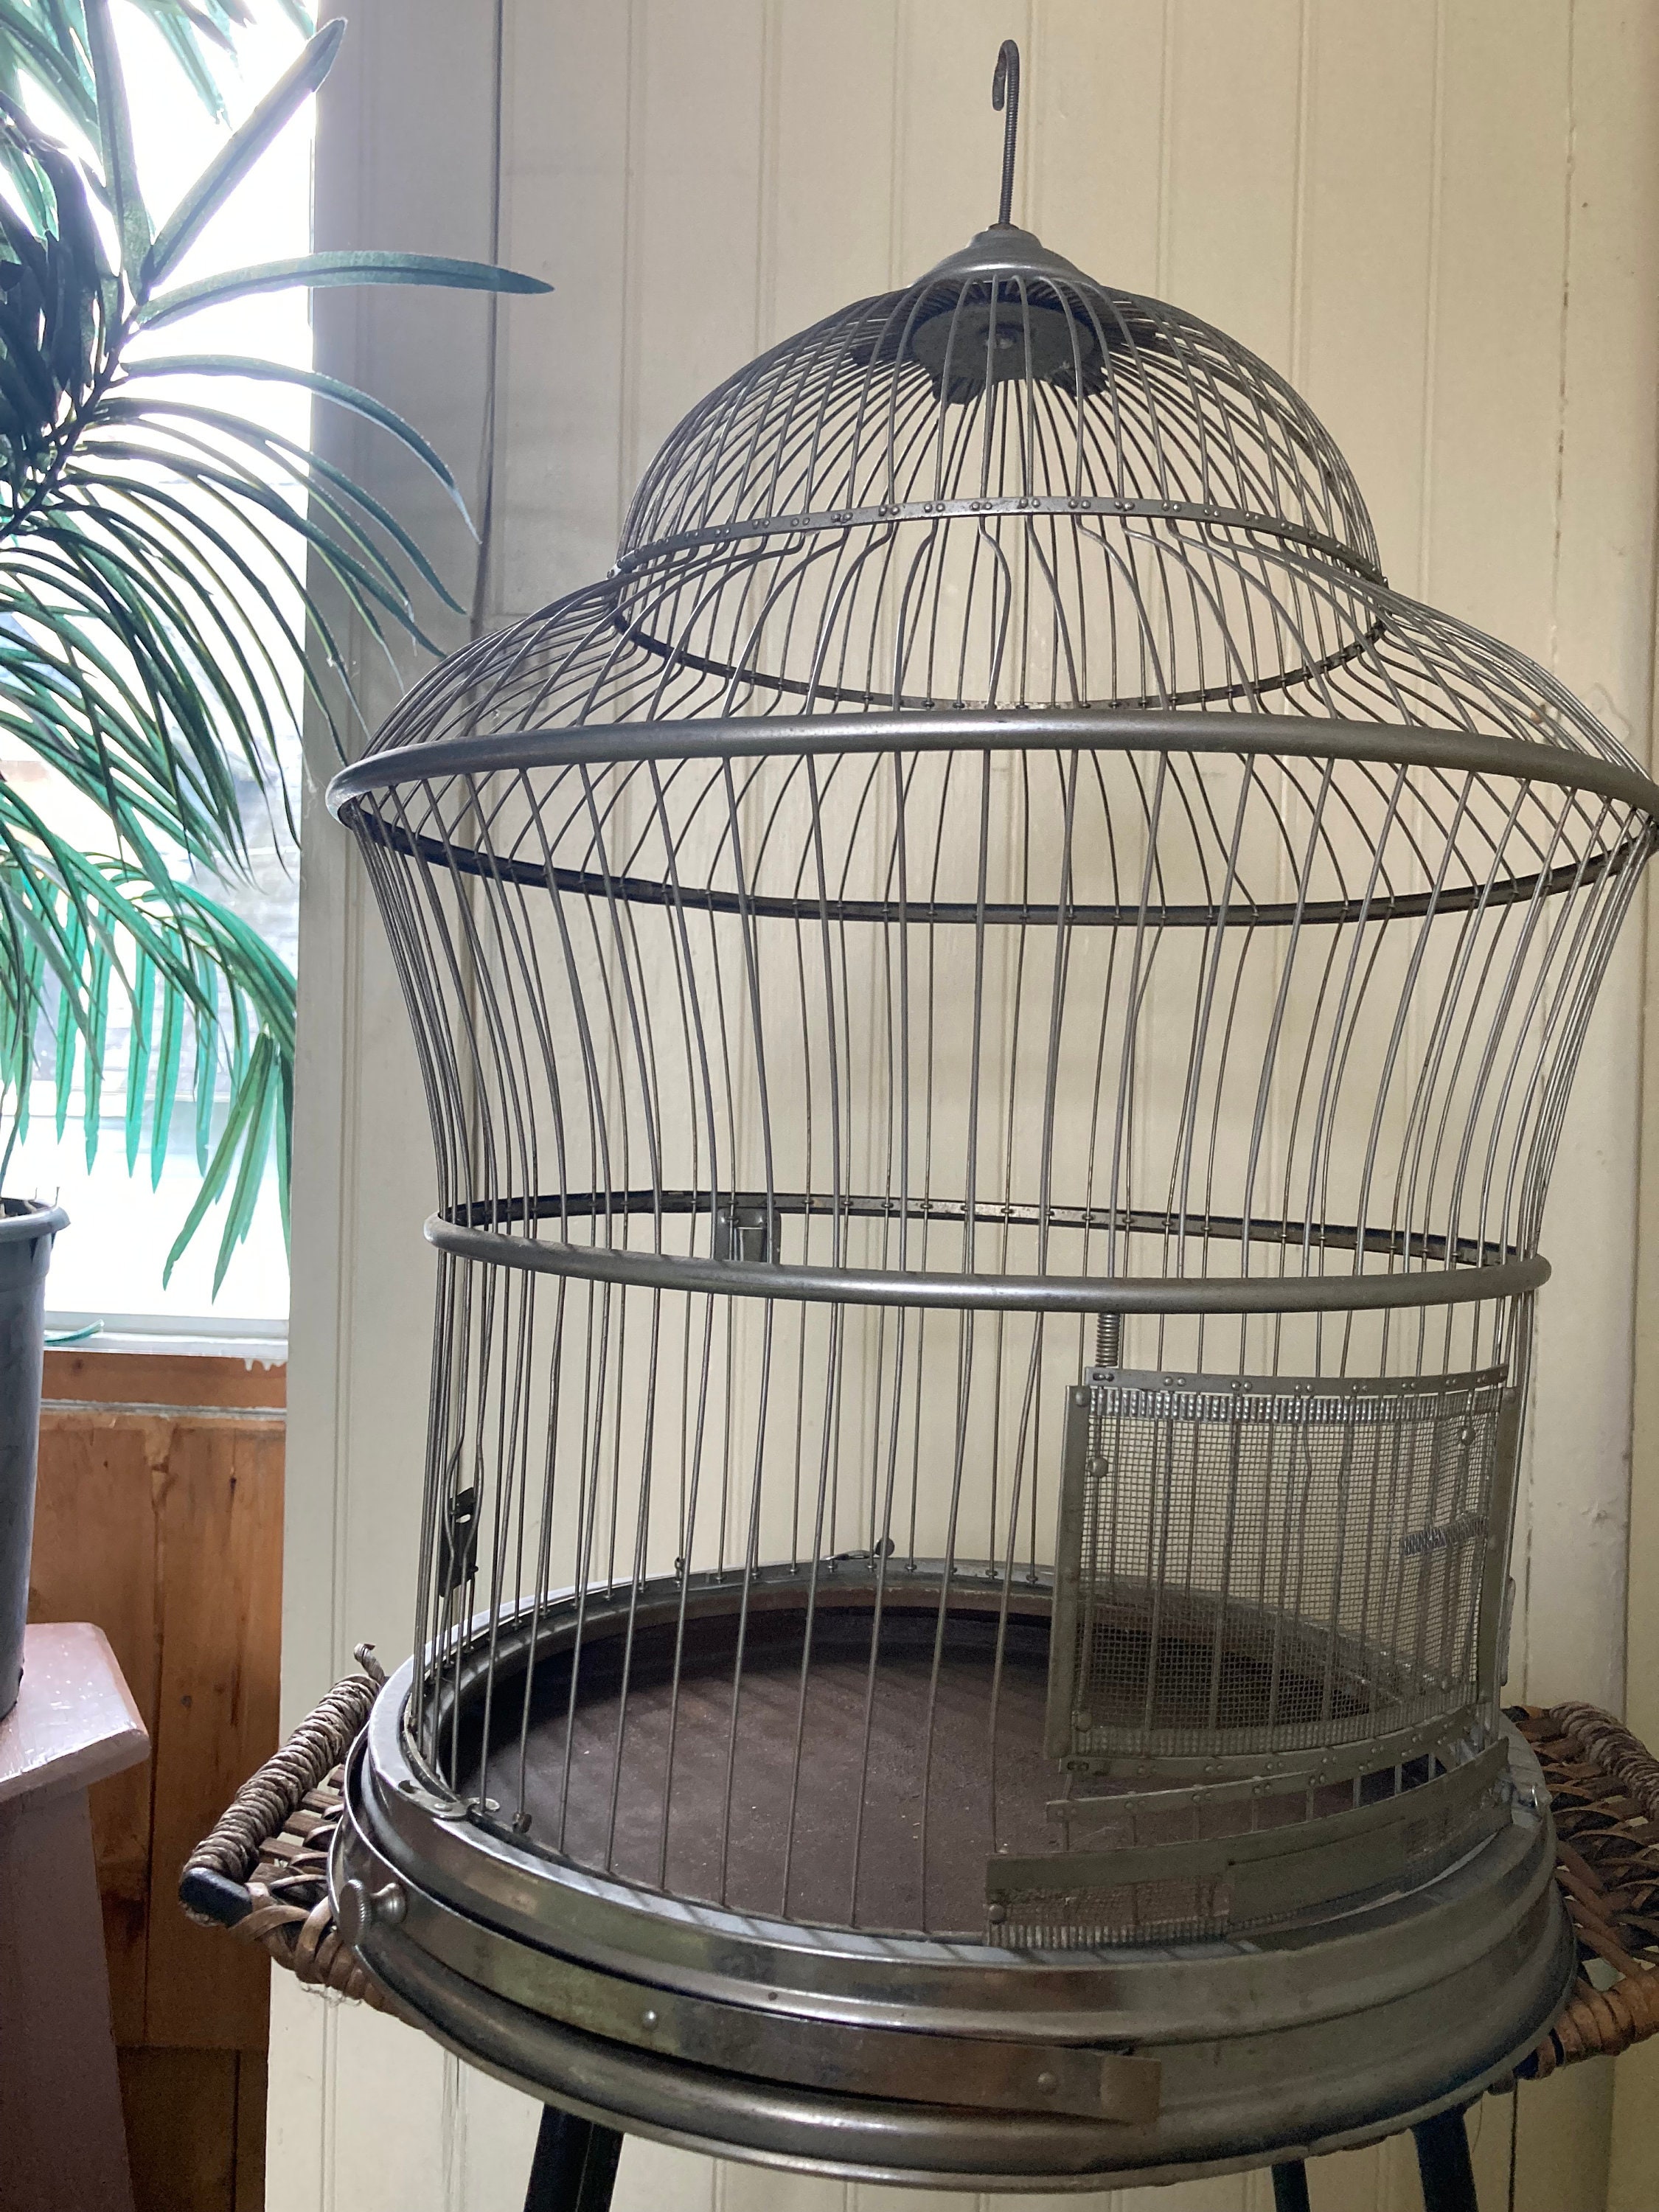 Tall Vintage Hanging Bird Cage (SOLD) - Antique Church Furnishings